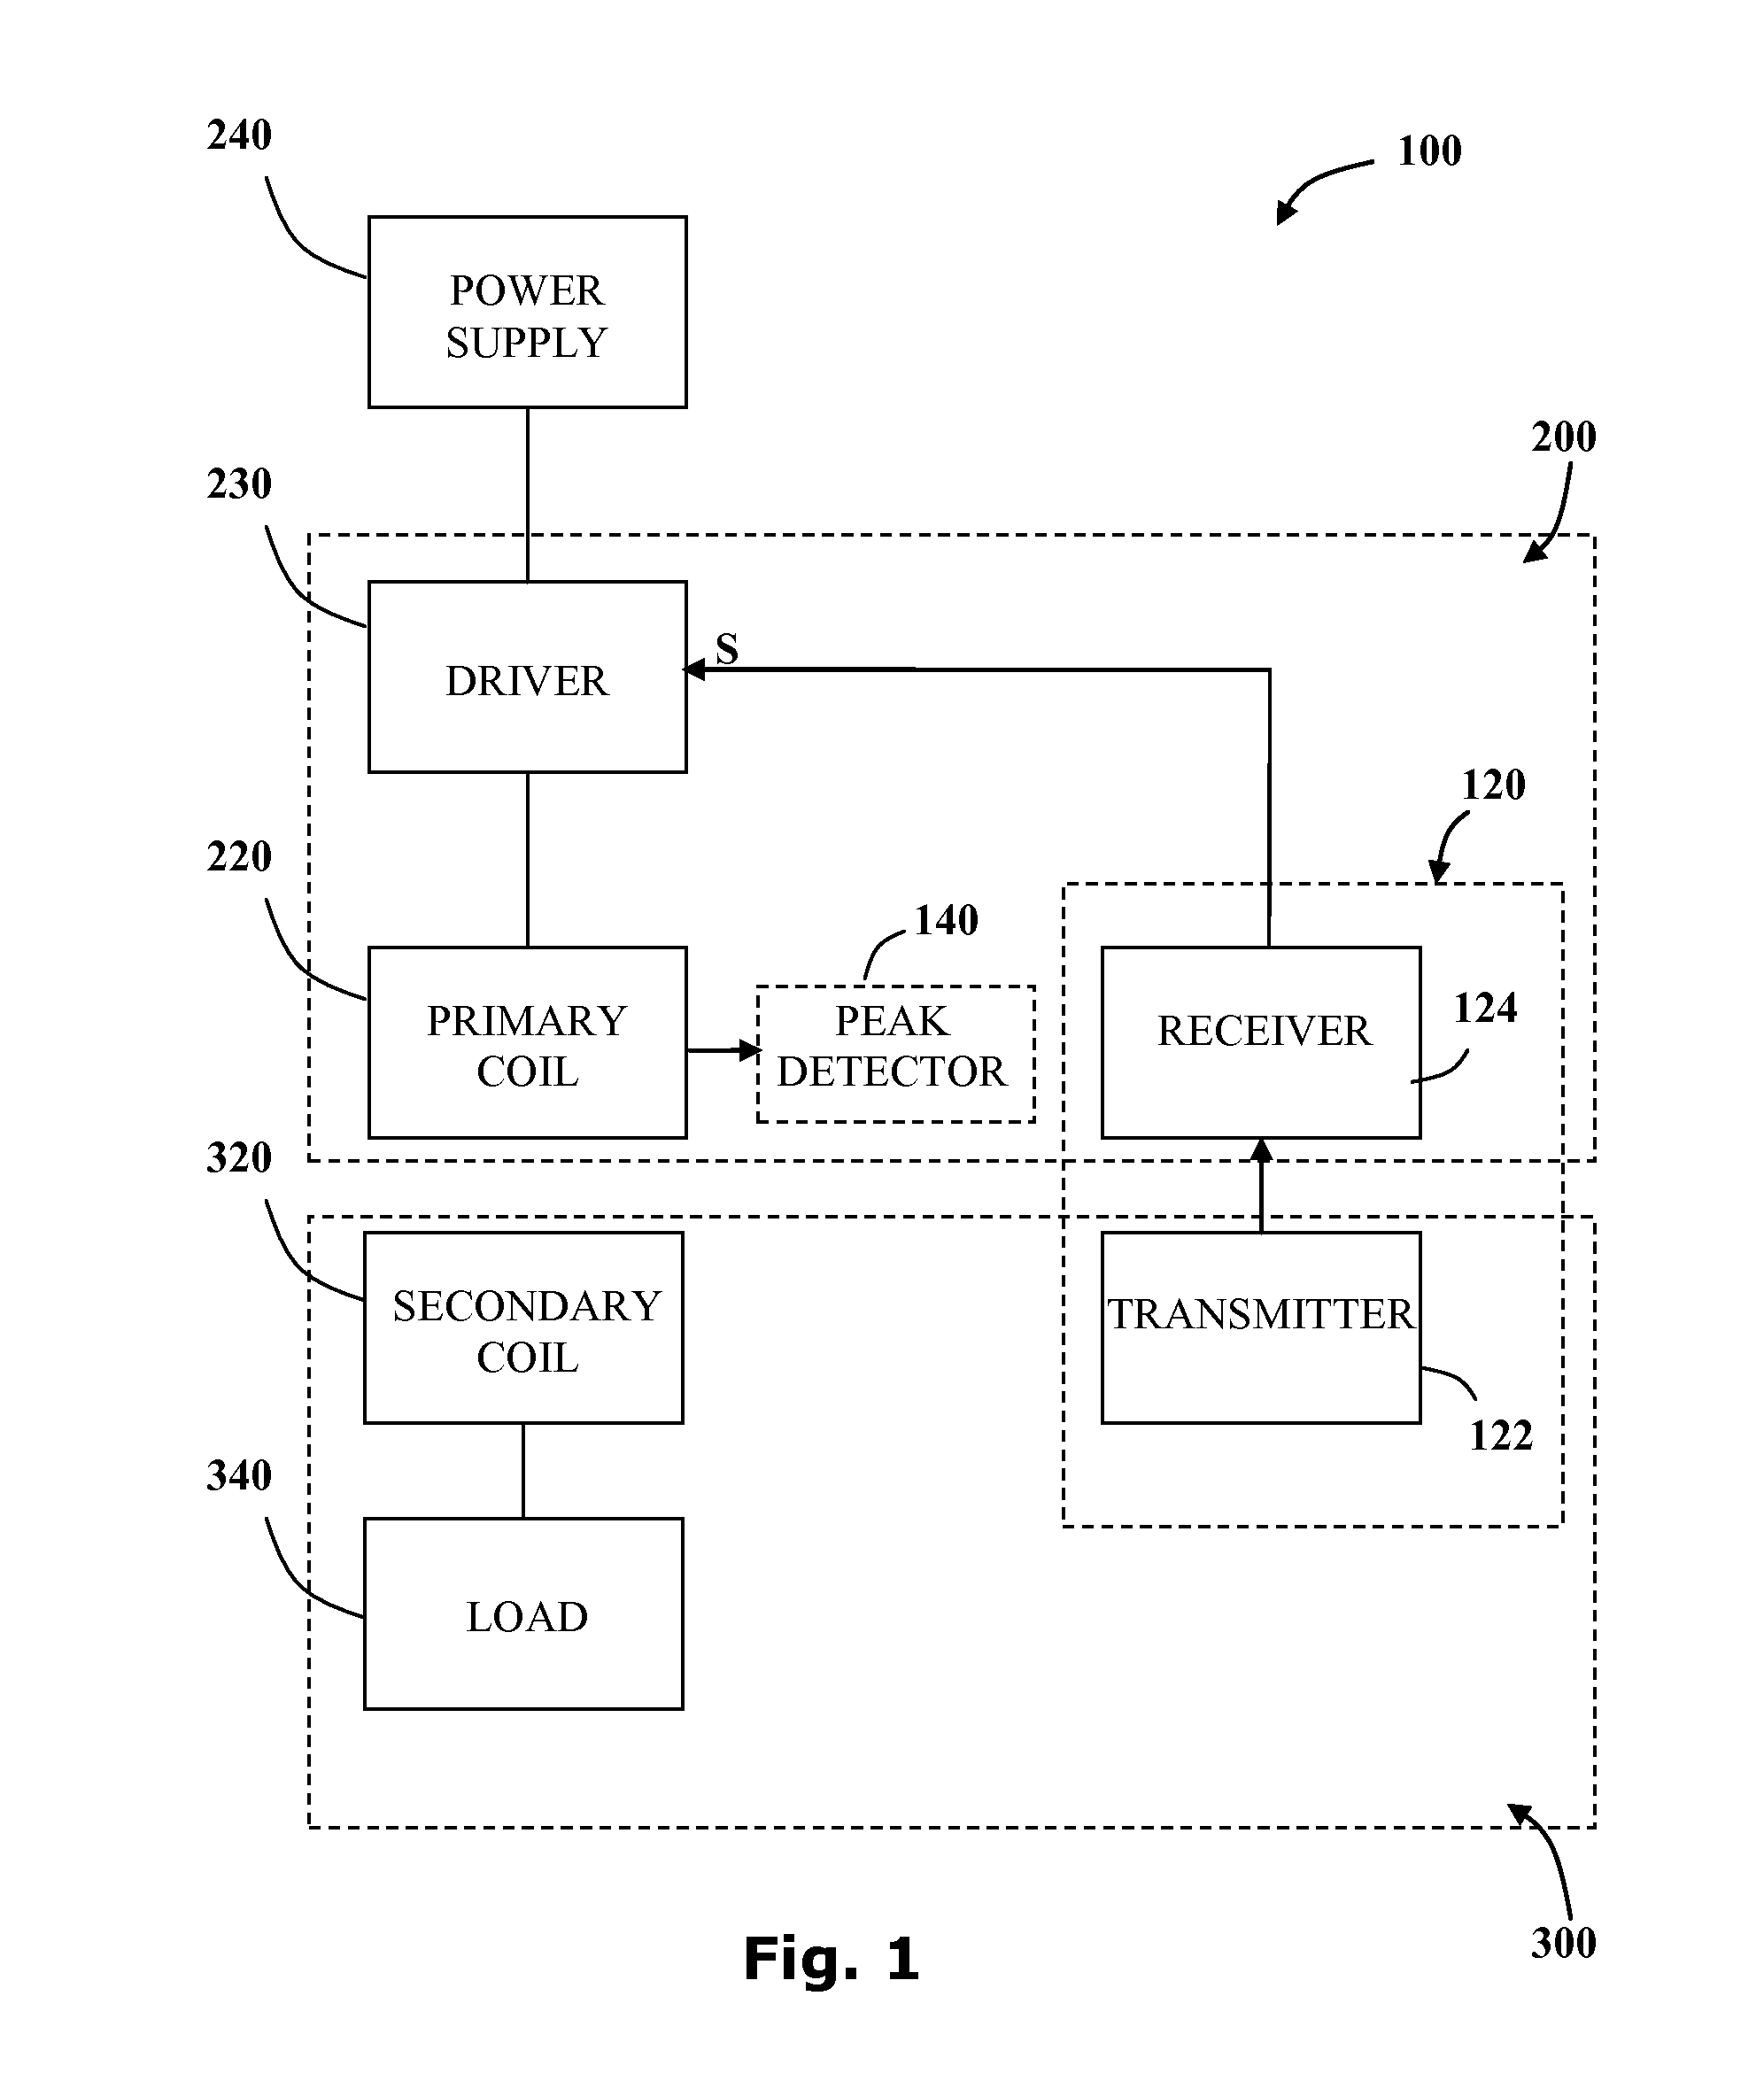 Energy efficient inductive power transmission system and method